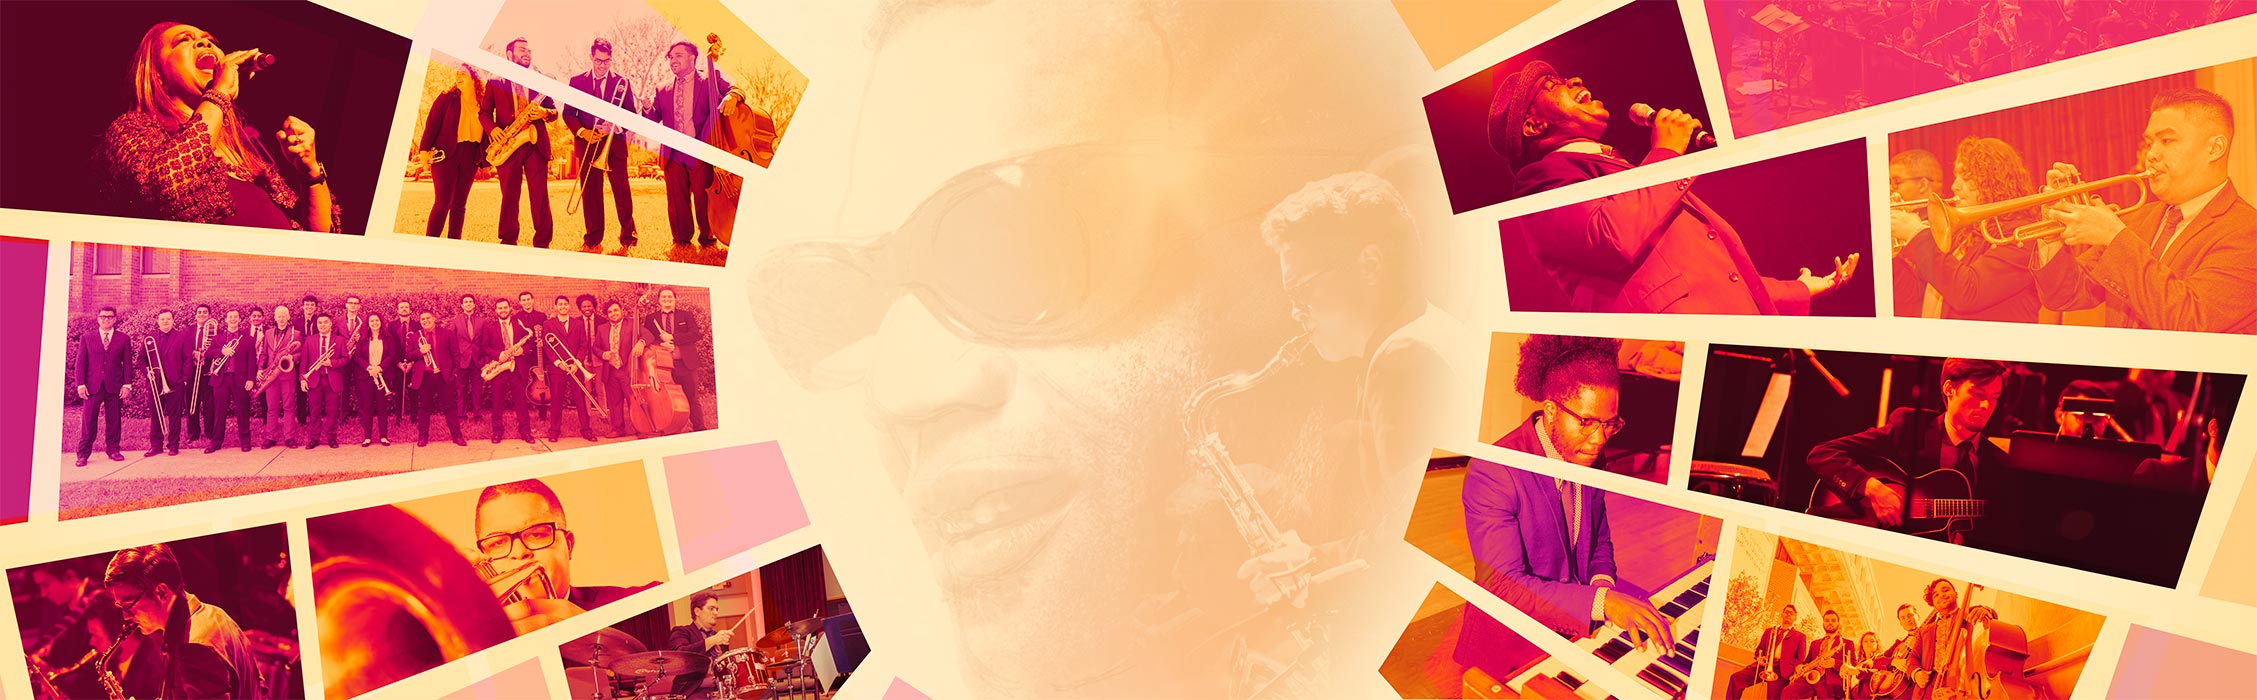 Collage of band photos with Ray Charles in the center